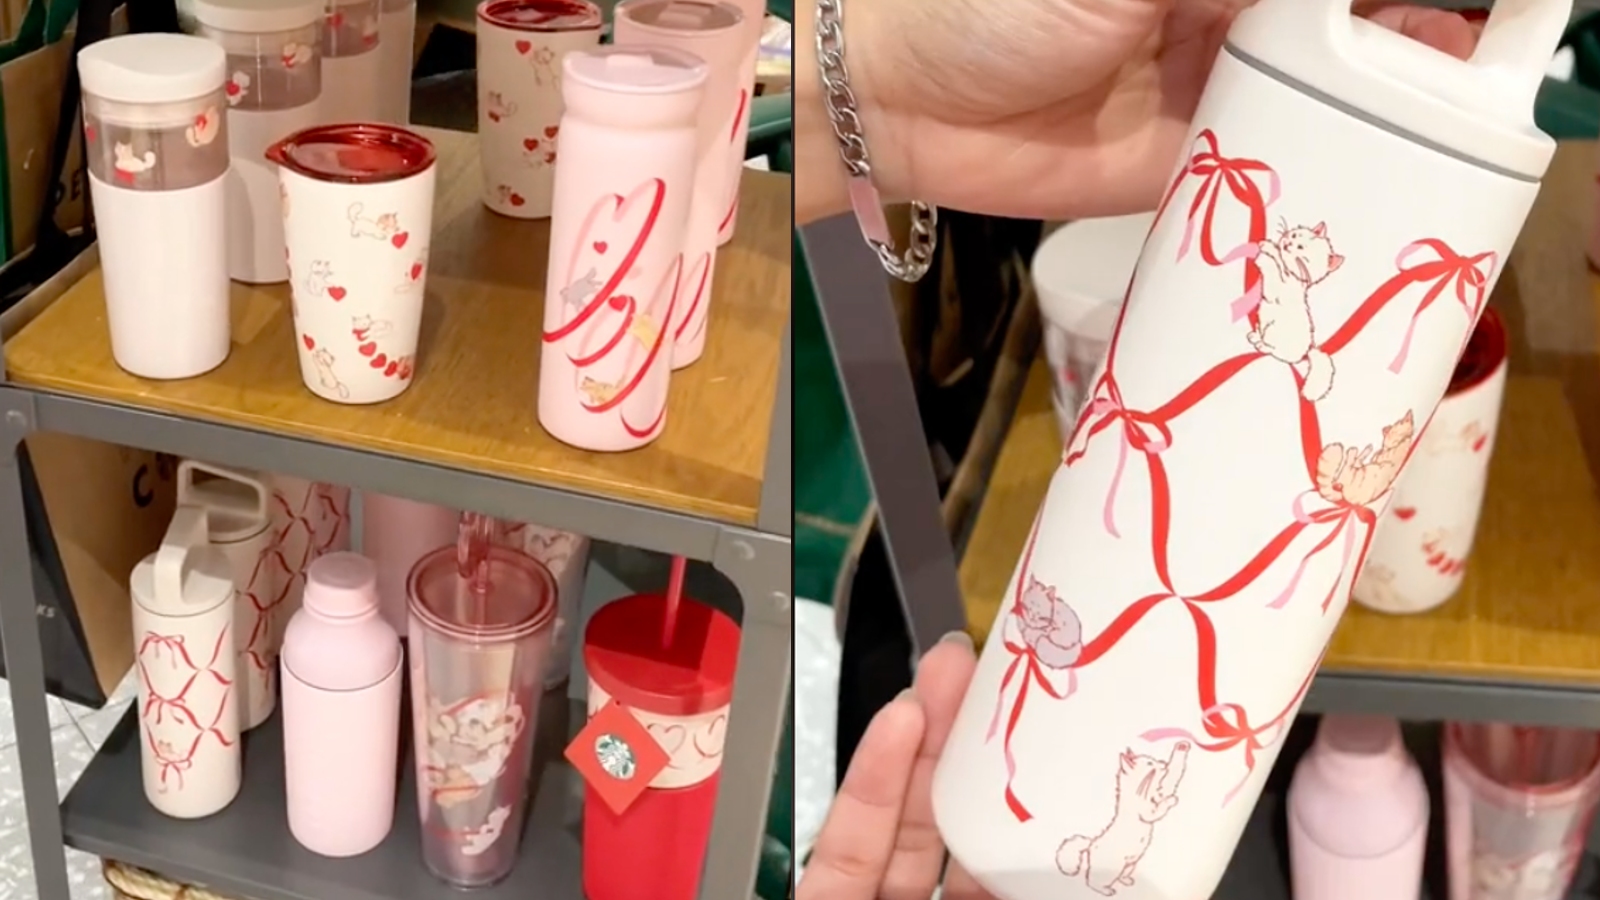 Starbucks' Valentine's Day Cup Line Is In Stores Now